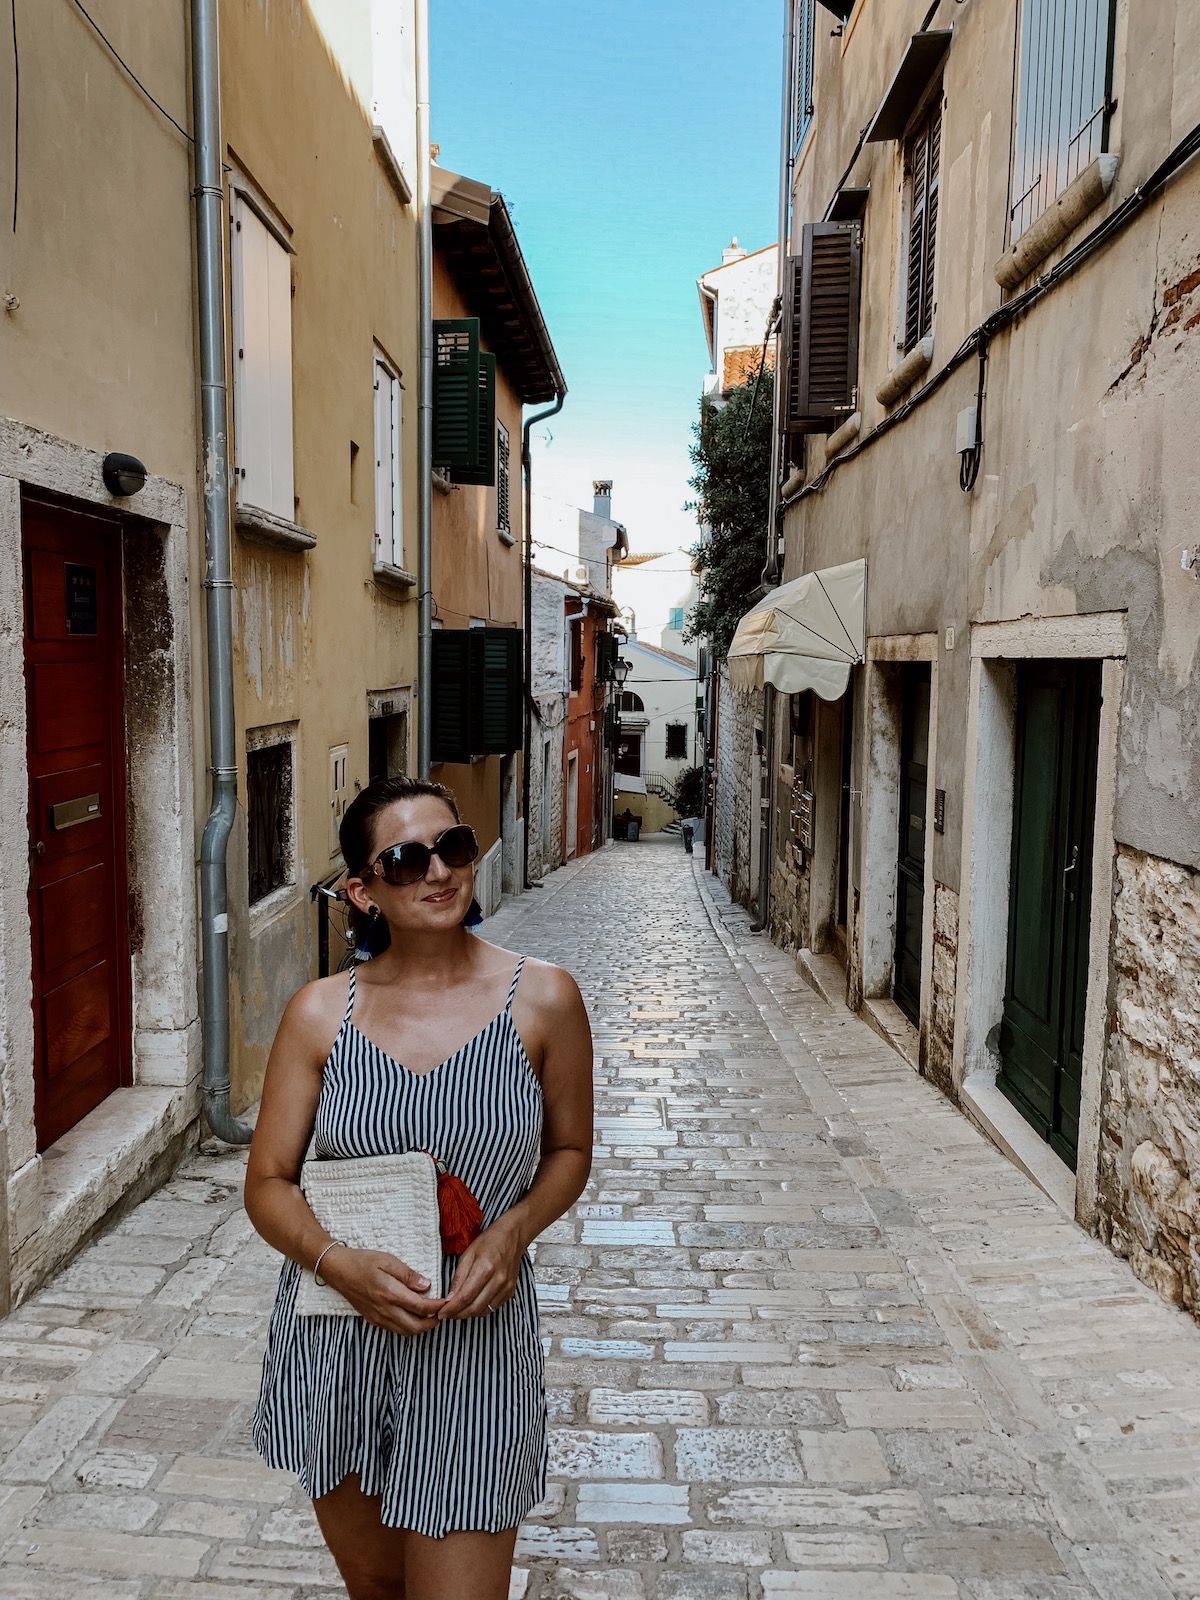 Eat + Stay + Play: Rovinj, Croatia Travel Guide | Cathedrals & Cafes